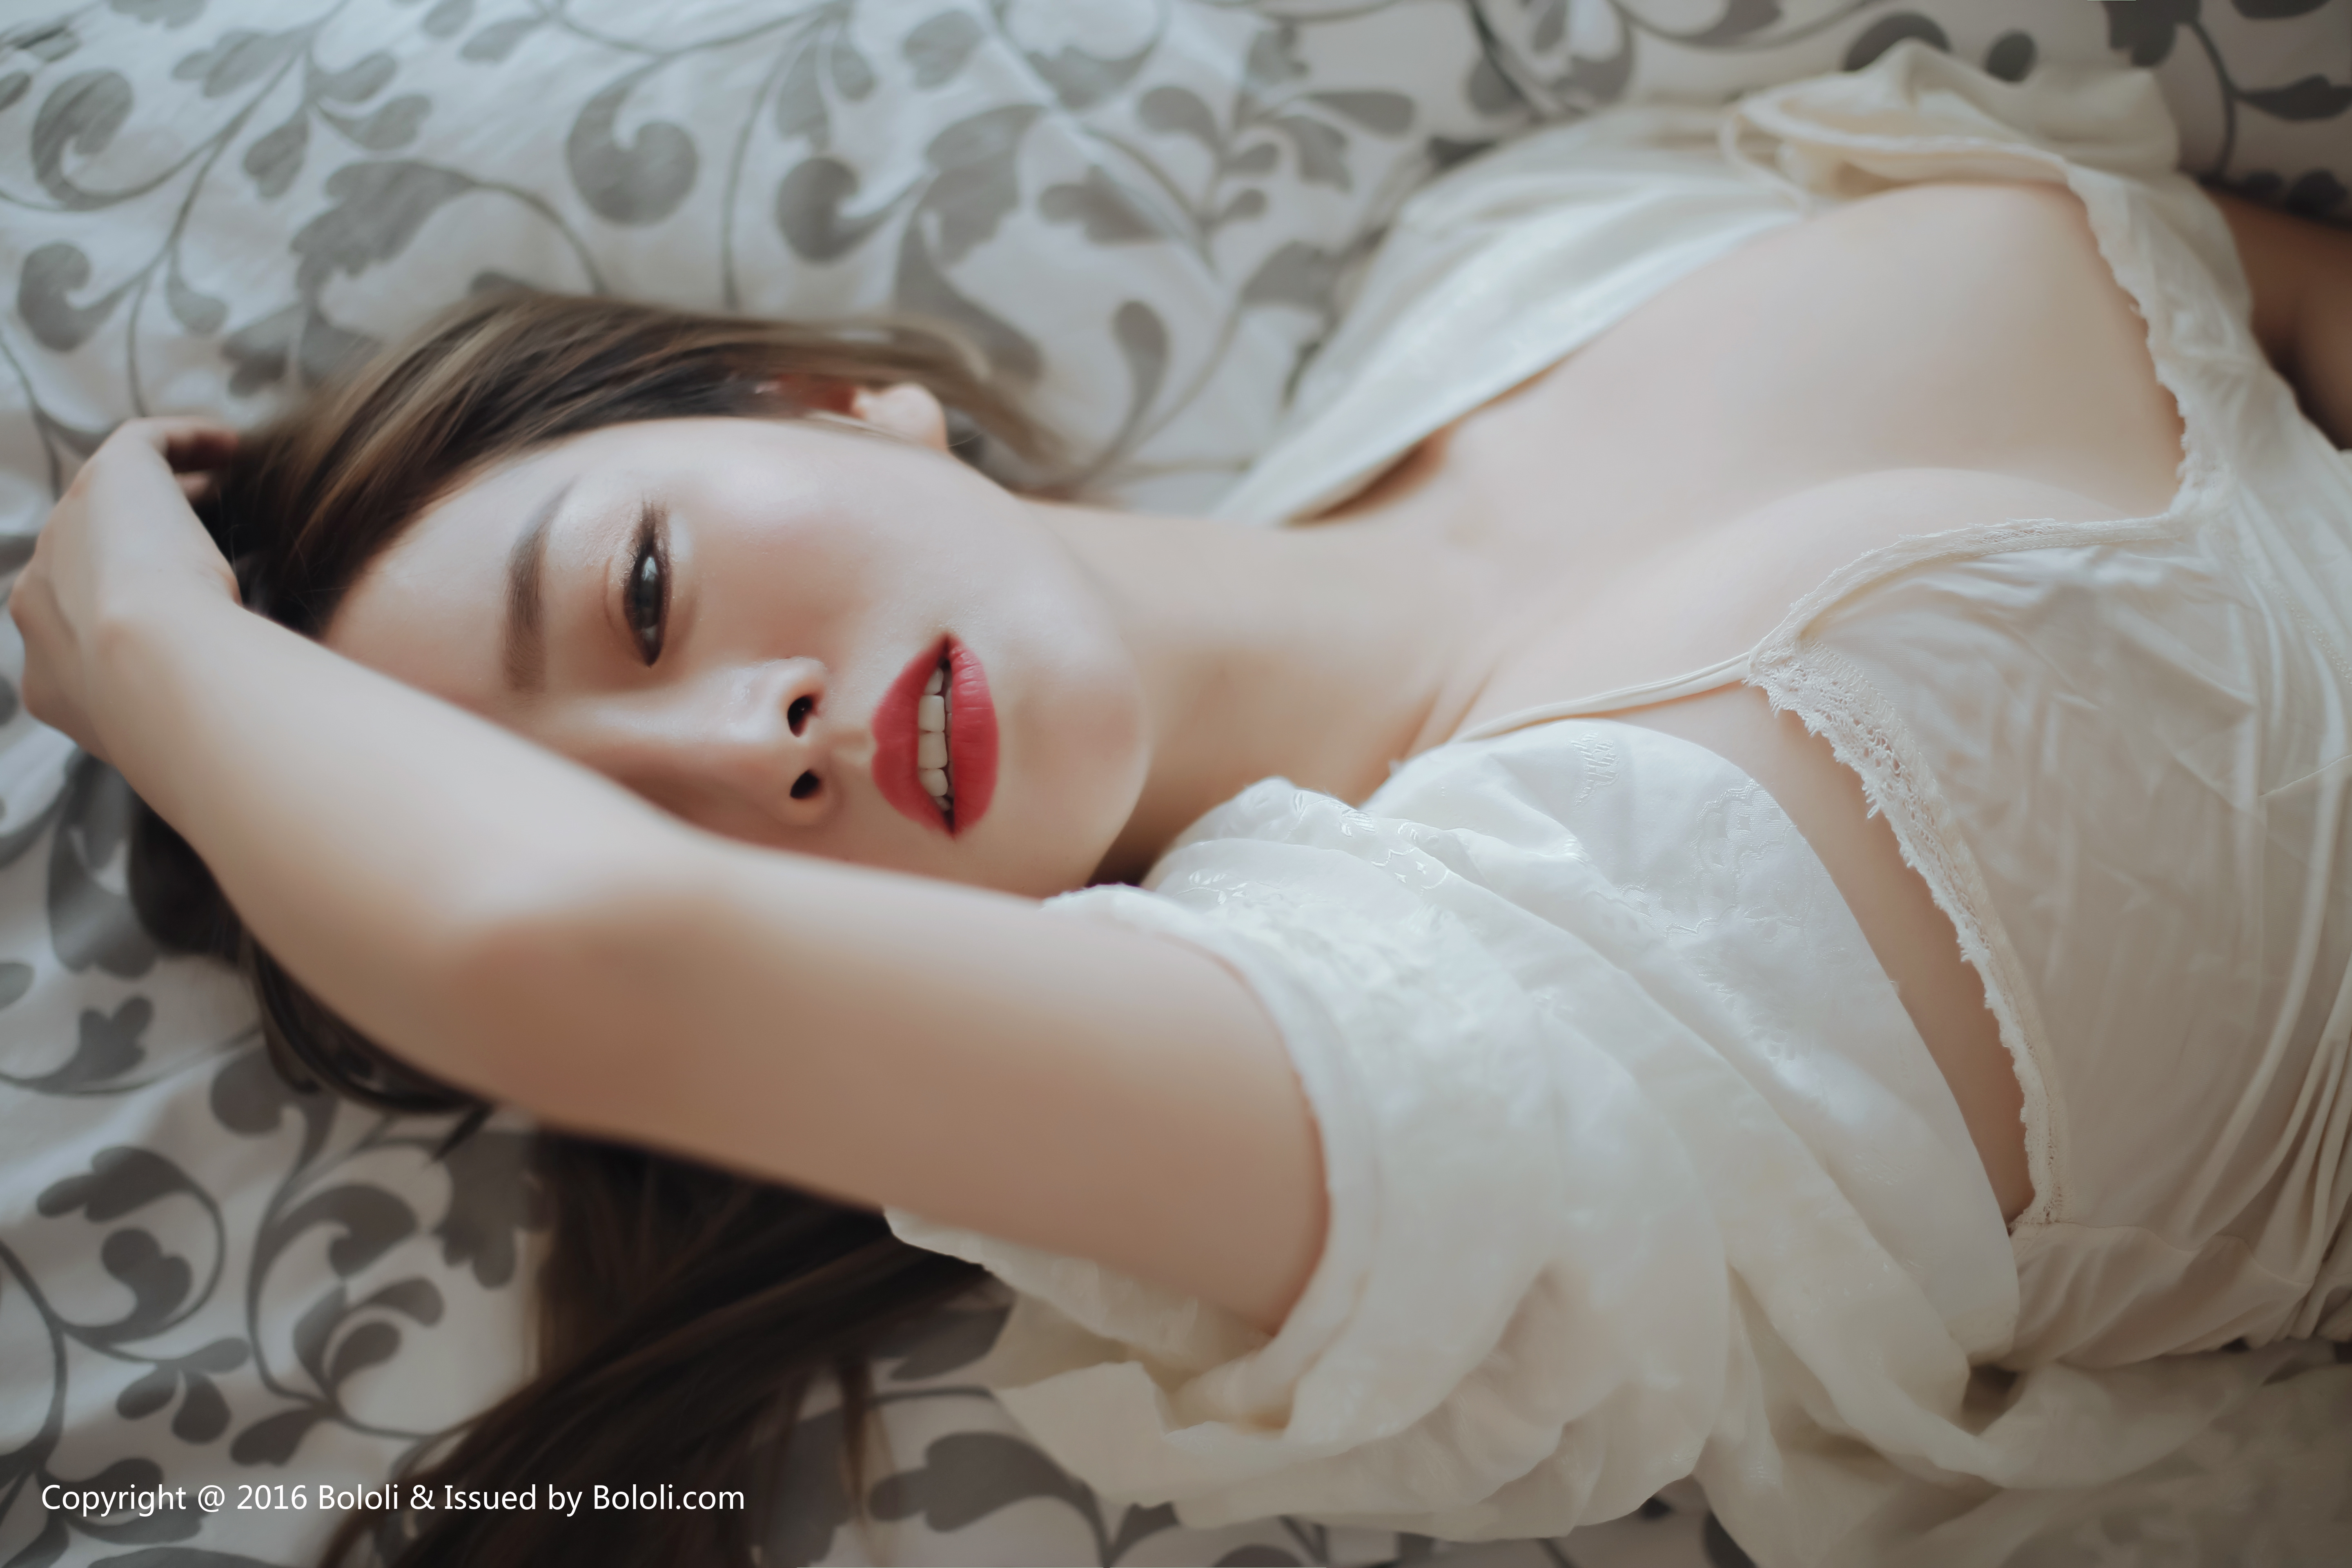 People 5760x3840 women Asian Chinese Chinese model looking at viewer arms up bra nightwear teeth watermarked 2016 (year) indoors women indoors Wang Yu Chun short hair white clothing model open mouth cleavage lying down lying on back red lipstick lipstick one eye obstructed bed long hair Bololi pale in bed floral